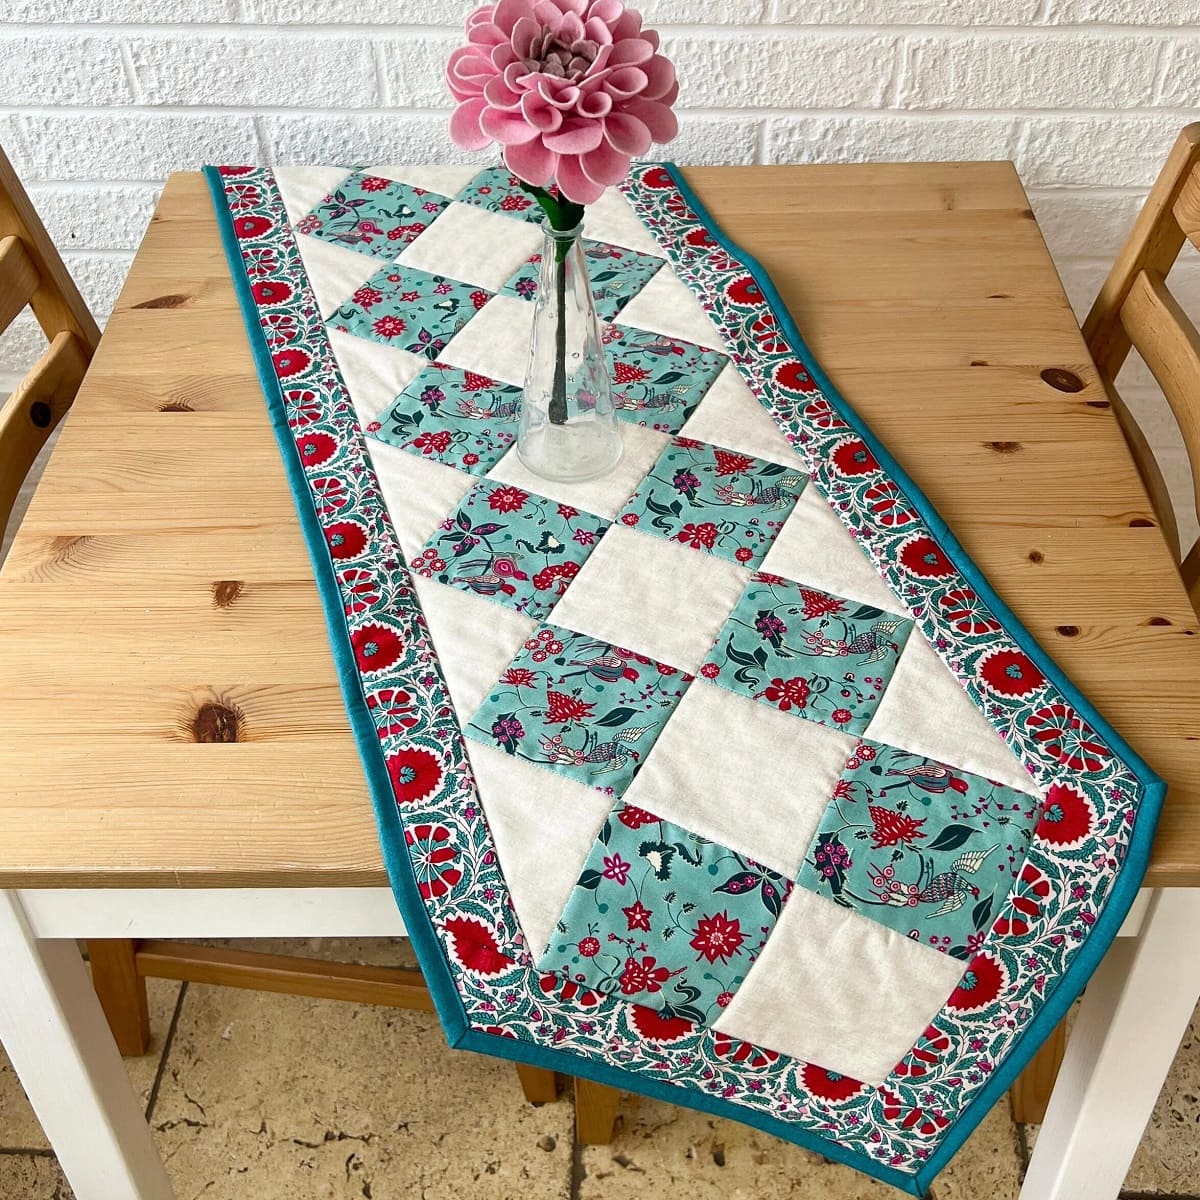 How To Quilt A Table Runner For Beginners